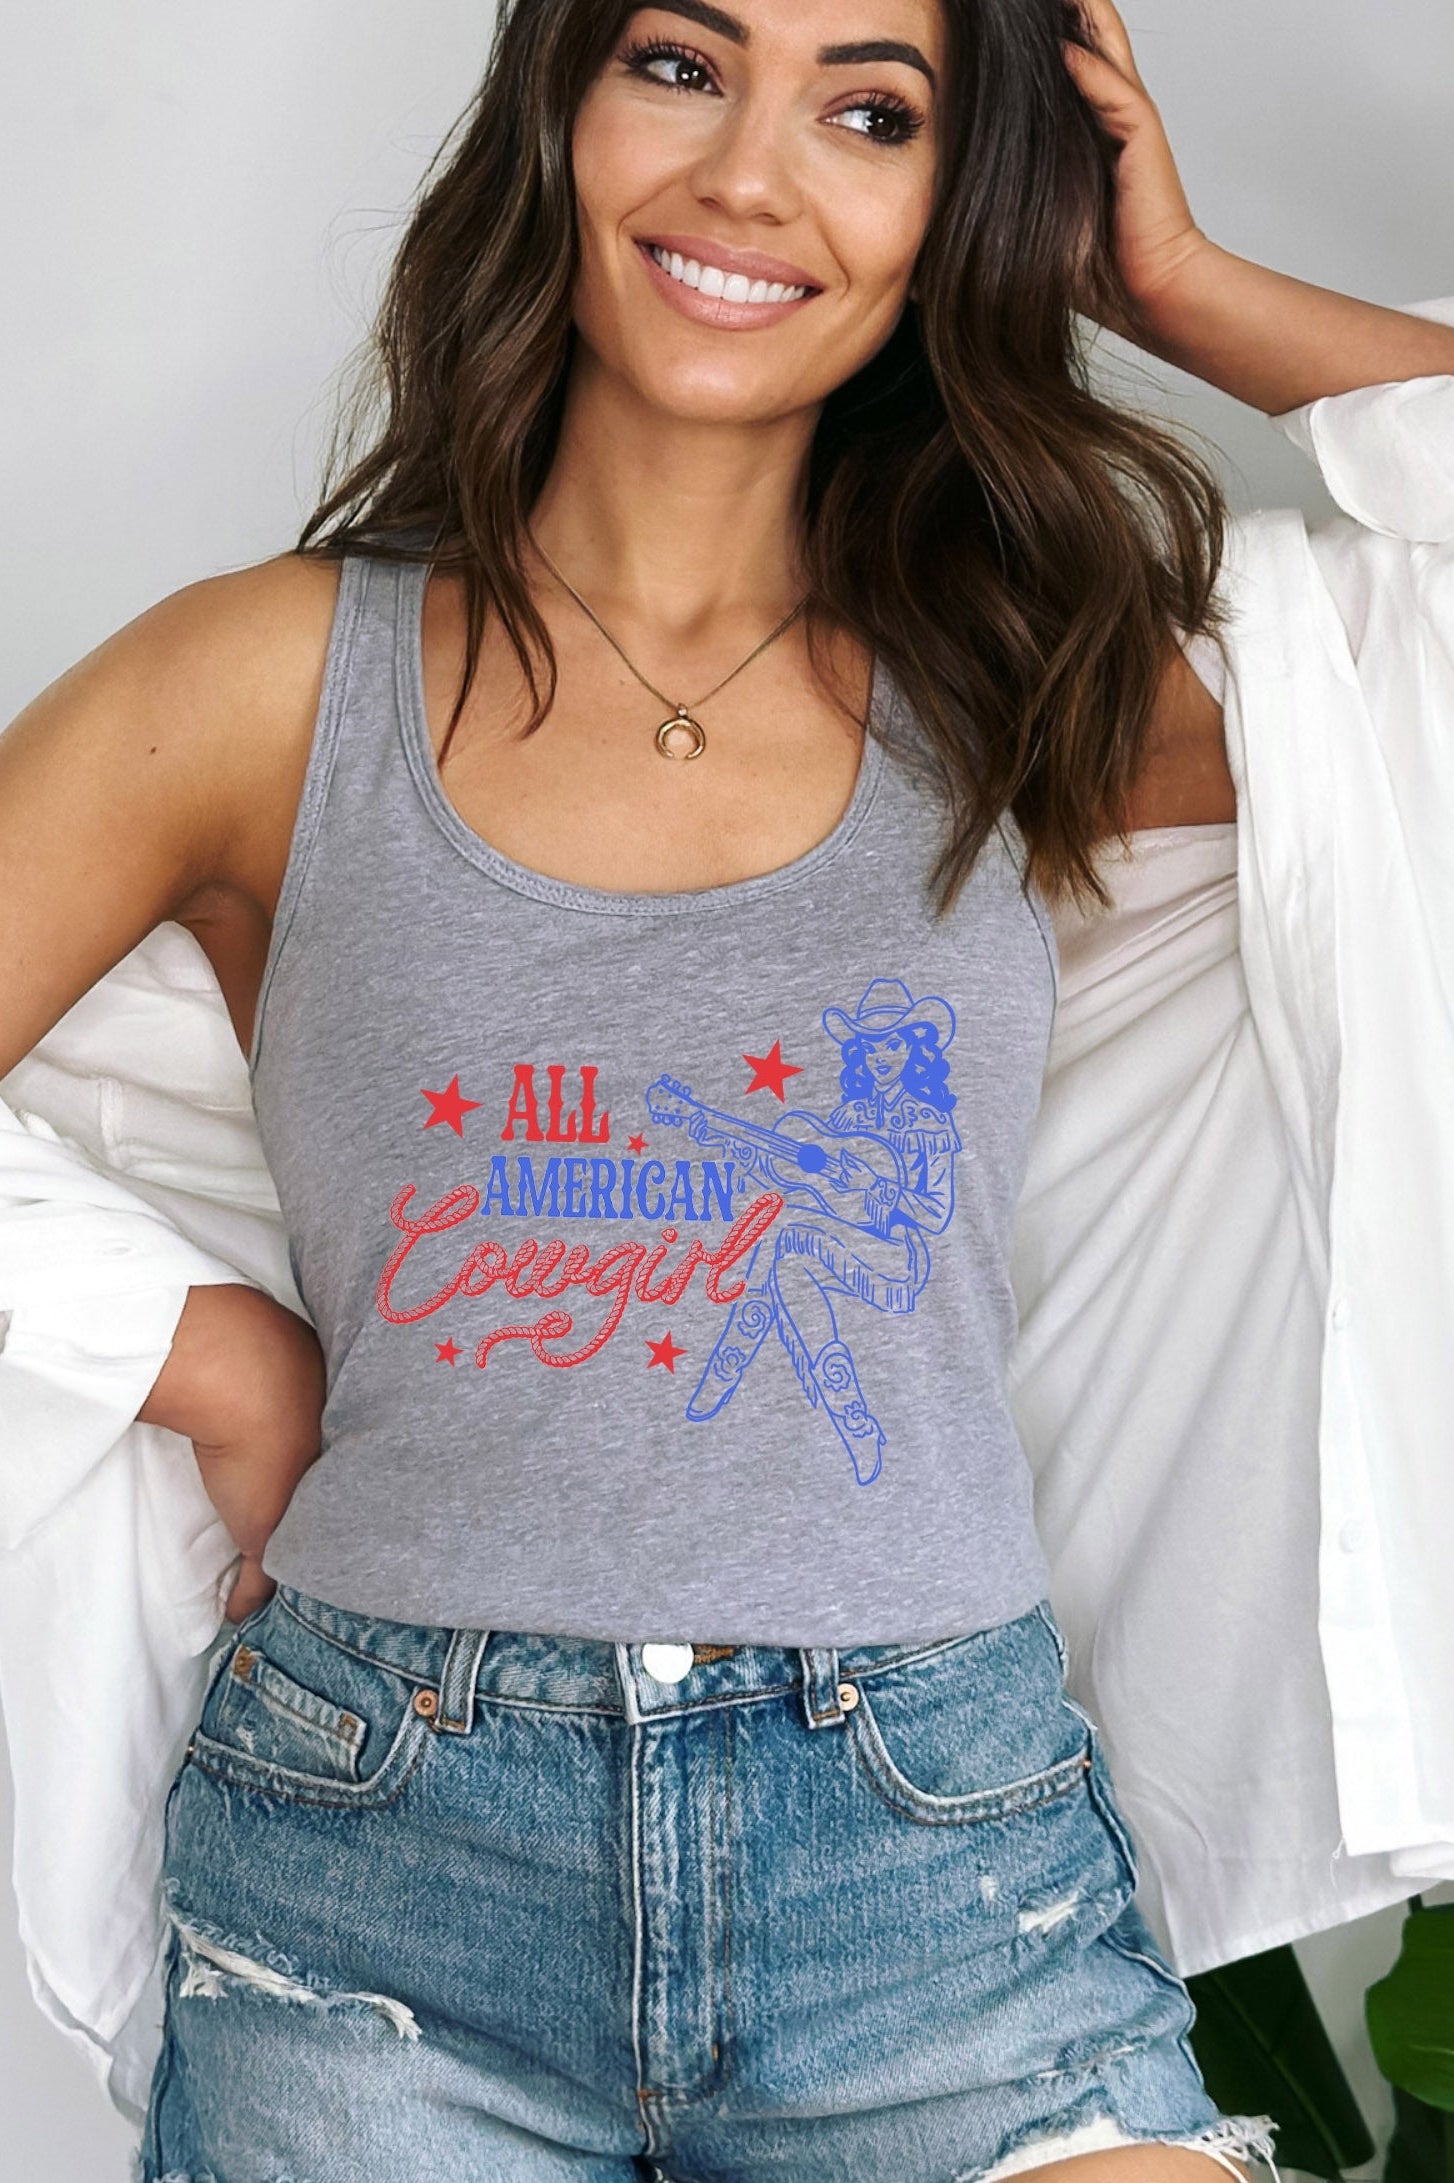 All American Cowgirl | Racerback Tank Olive and Ivory Retail